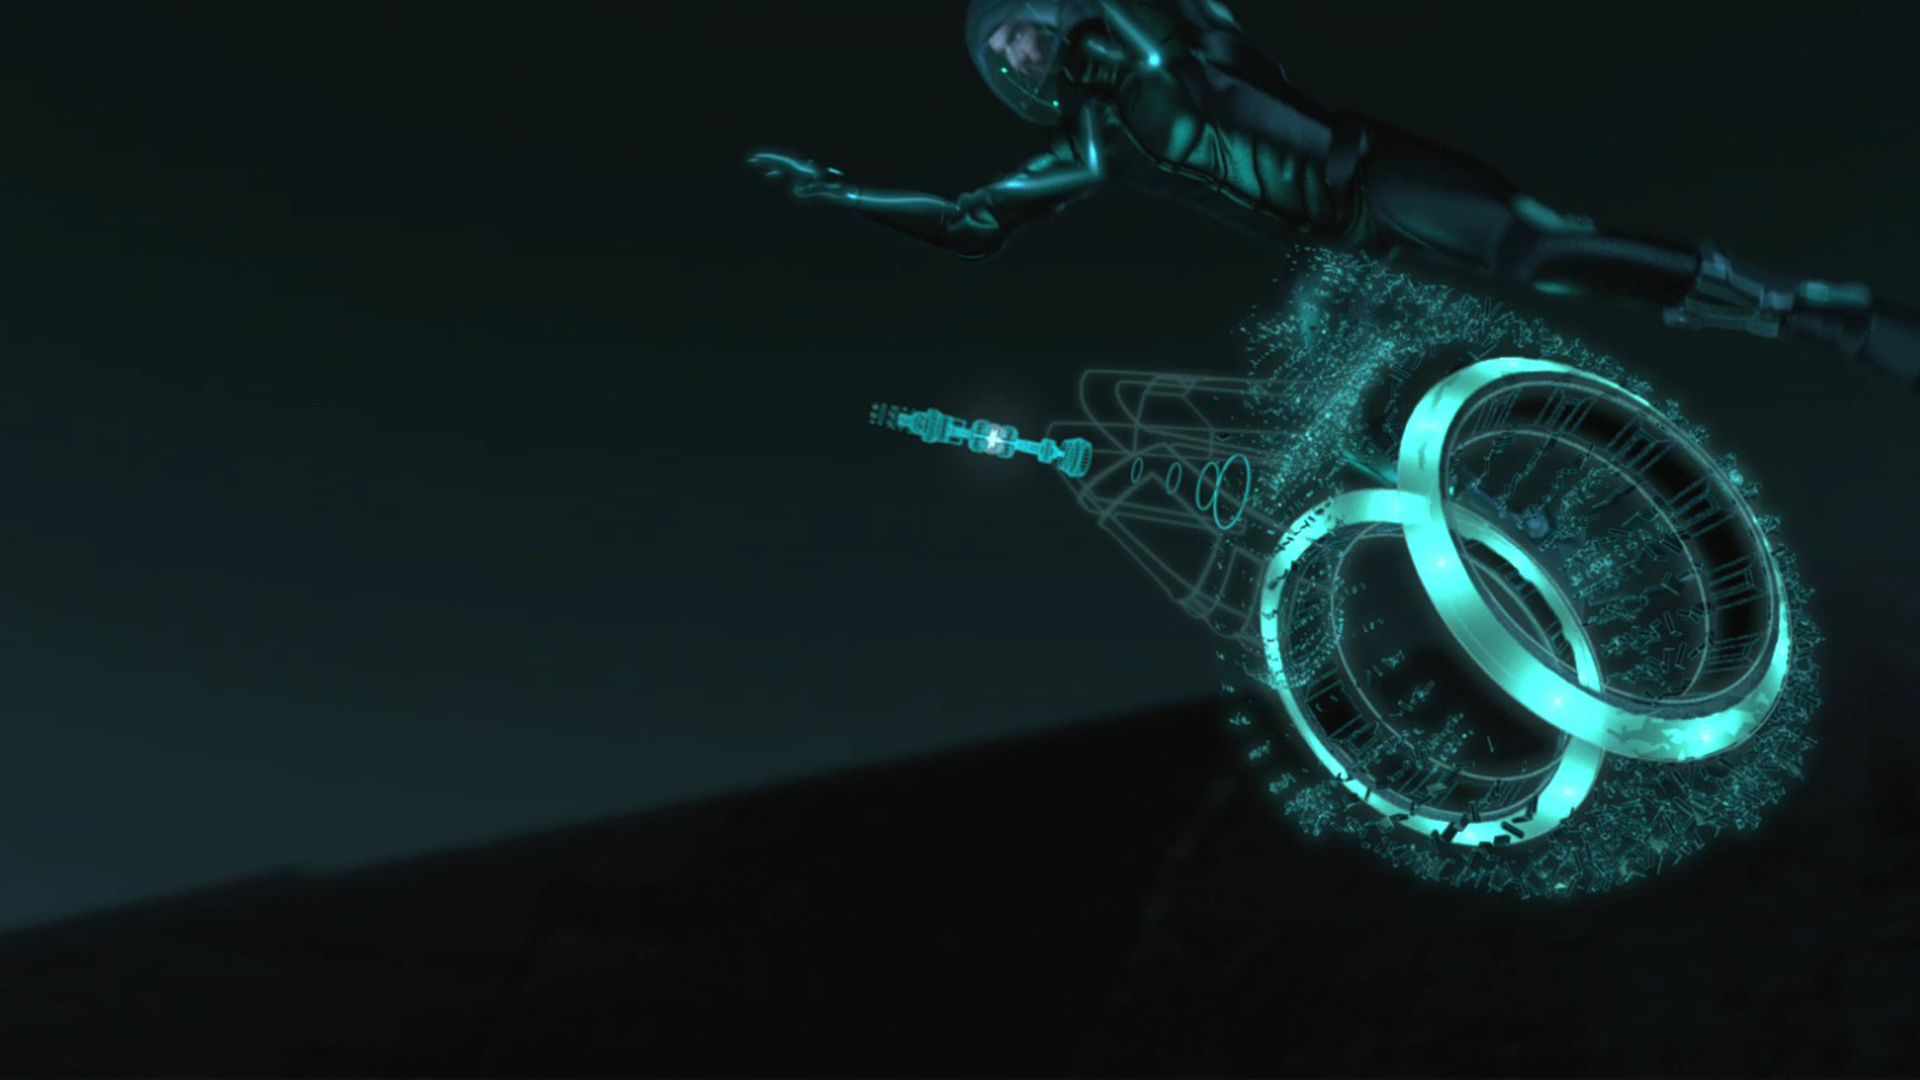 Tron Legacy jumping on the motorcycle HD Wallpaper